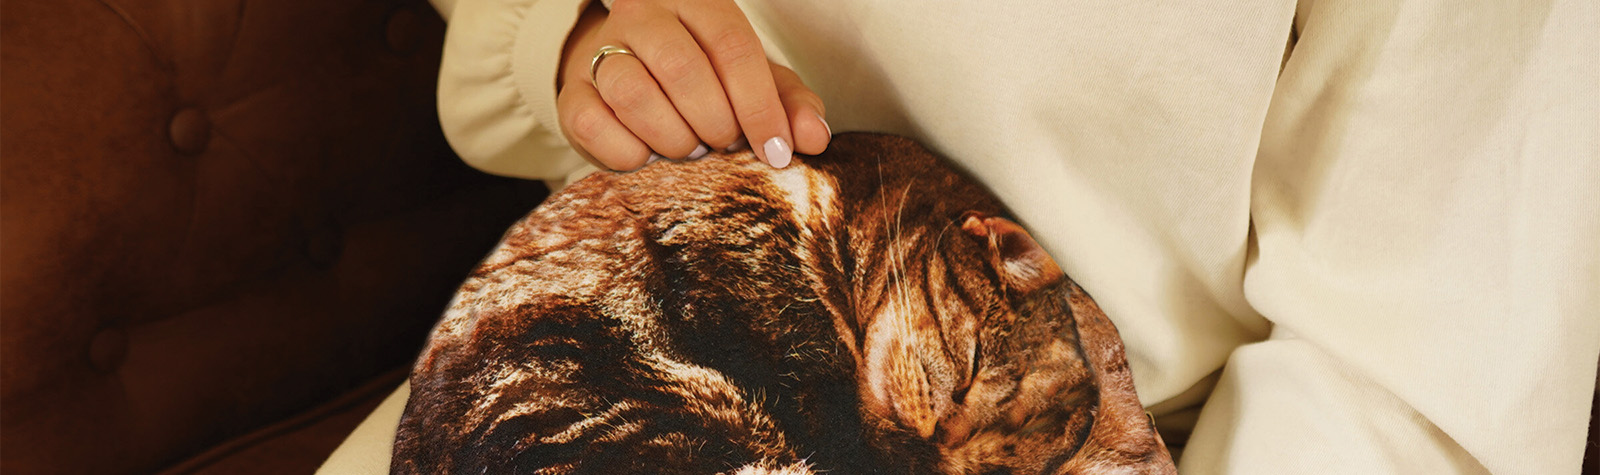 Great New Product Highlight: Cosy Cat Hot Water Bottle, The Purr-fect Blend of Warmth and Whimsy